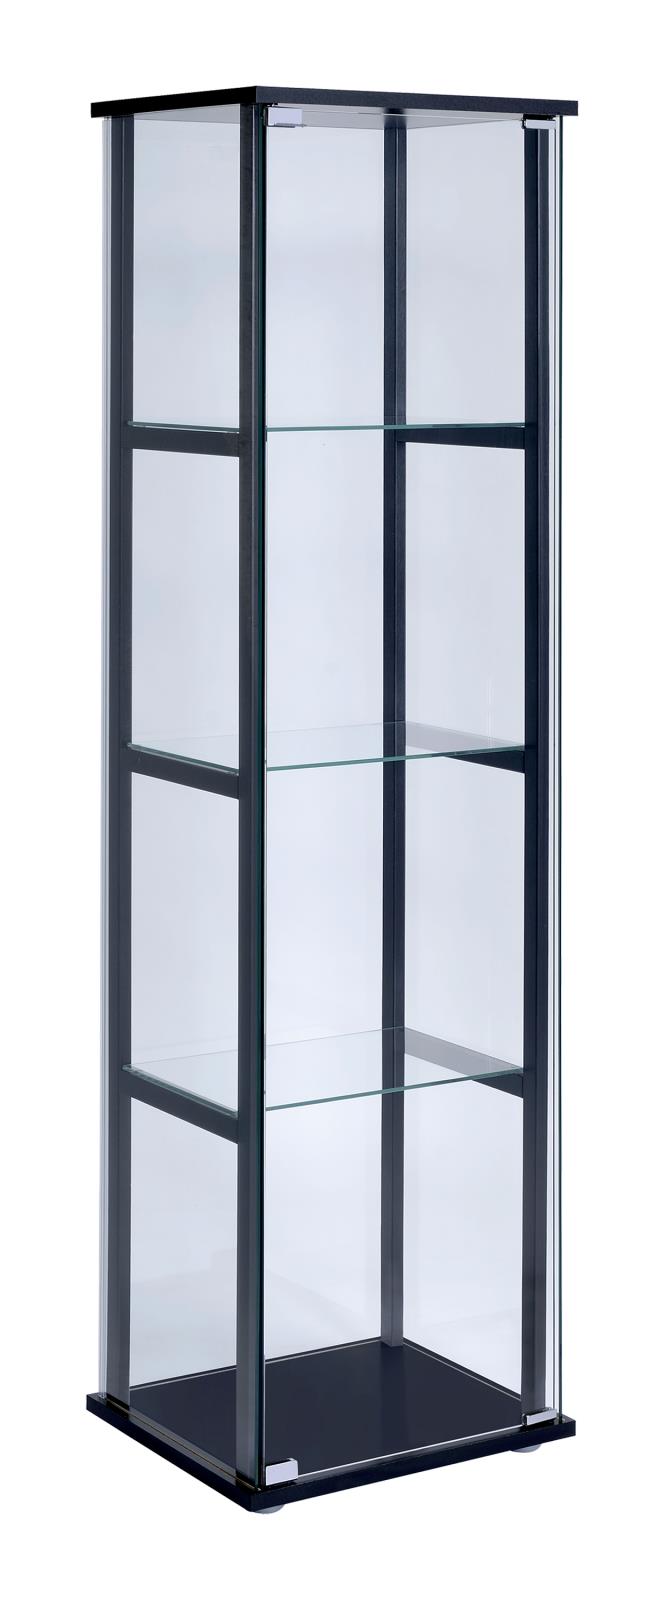 4-shelf Glass Curio Cabinet Black and Clear - What A Room